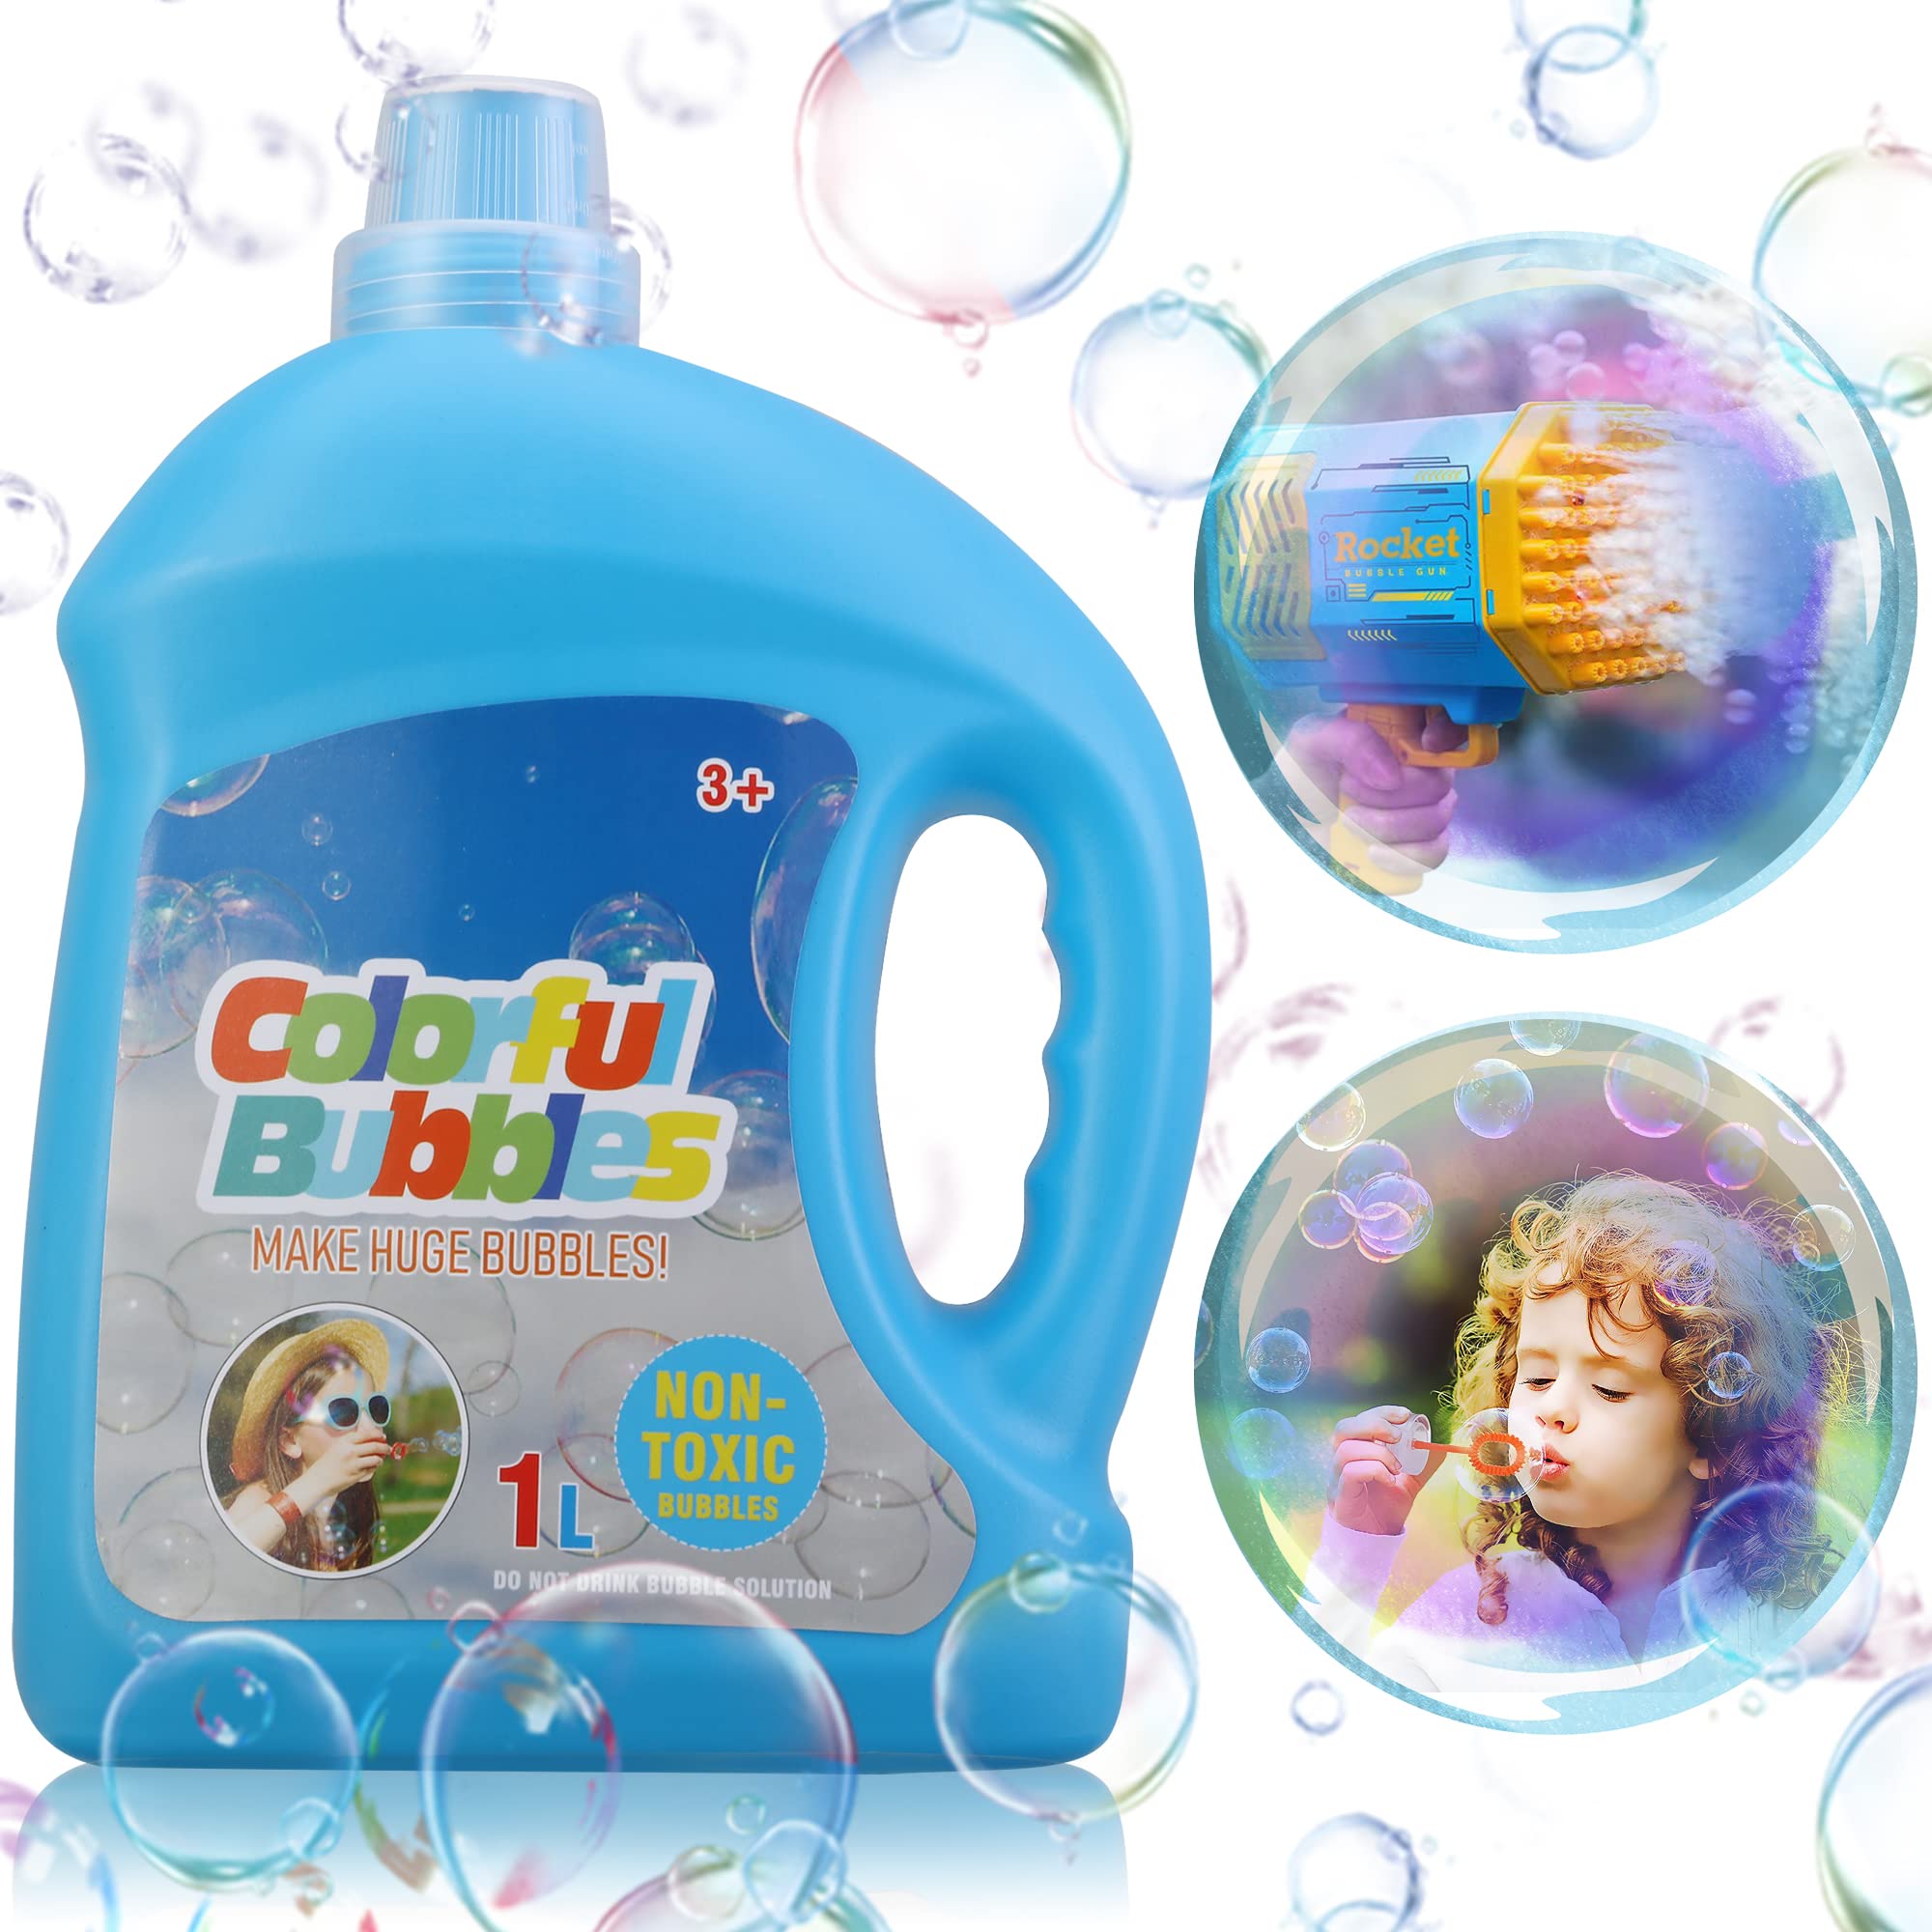 SHCKE Concentrated Bubble Machine Solution, 1 L/ 33.8 OZ Bubble Solution Refill for All Bubble Toys, Bubble Gun and Bubble Machine,Safe and Fun, Easy to Use, Leak-Proof and Portable